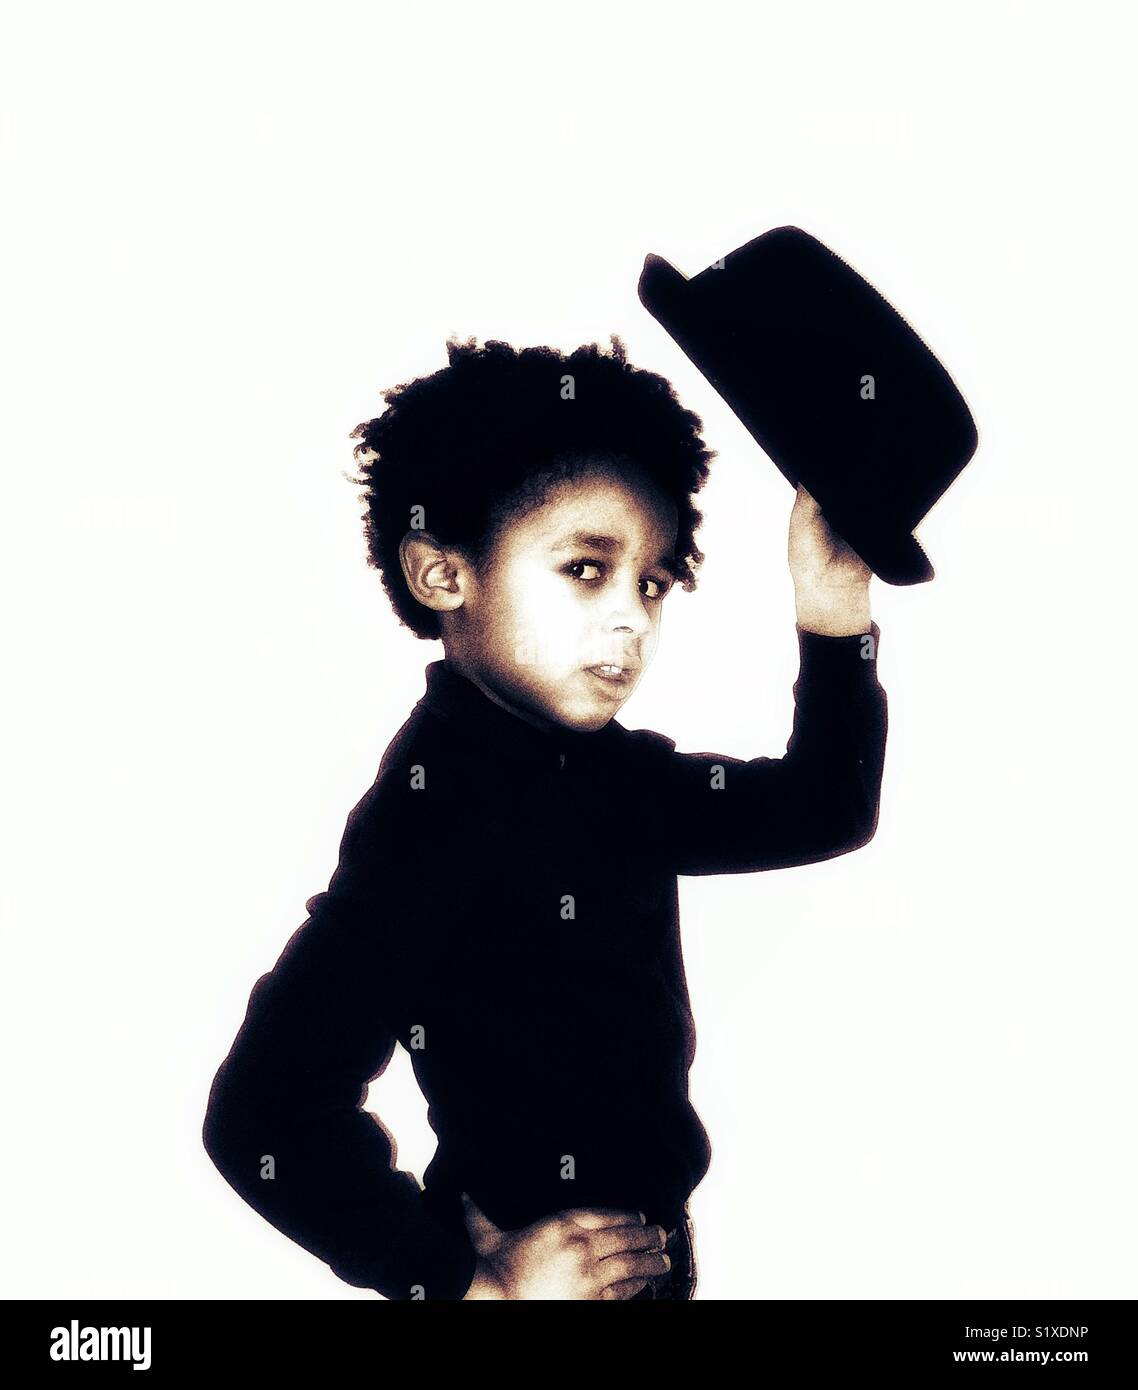 Boy posing with a hat Banque D'Images